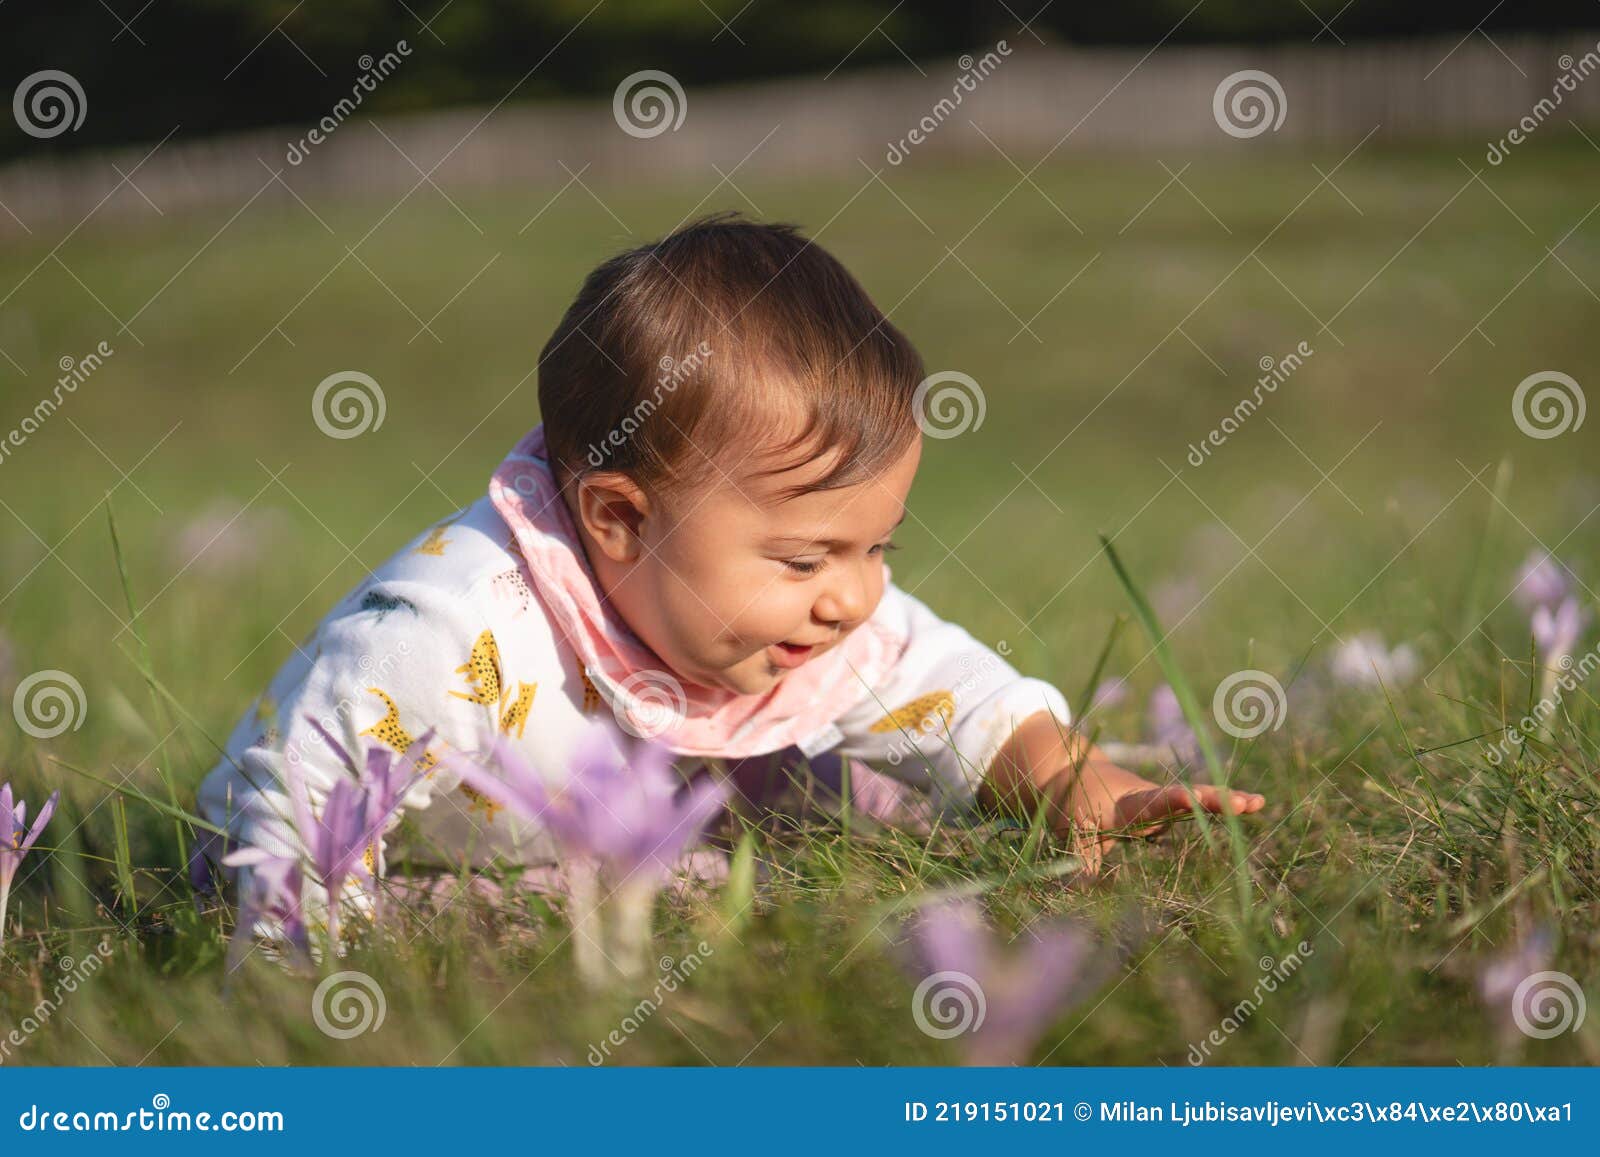 Baby Girl Playing in the Grass Field Stock Image - Image of infant ...